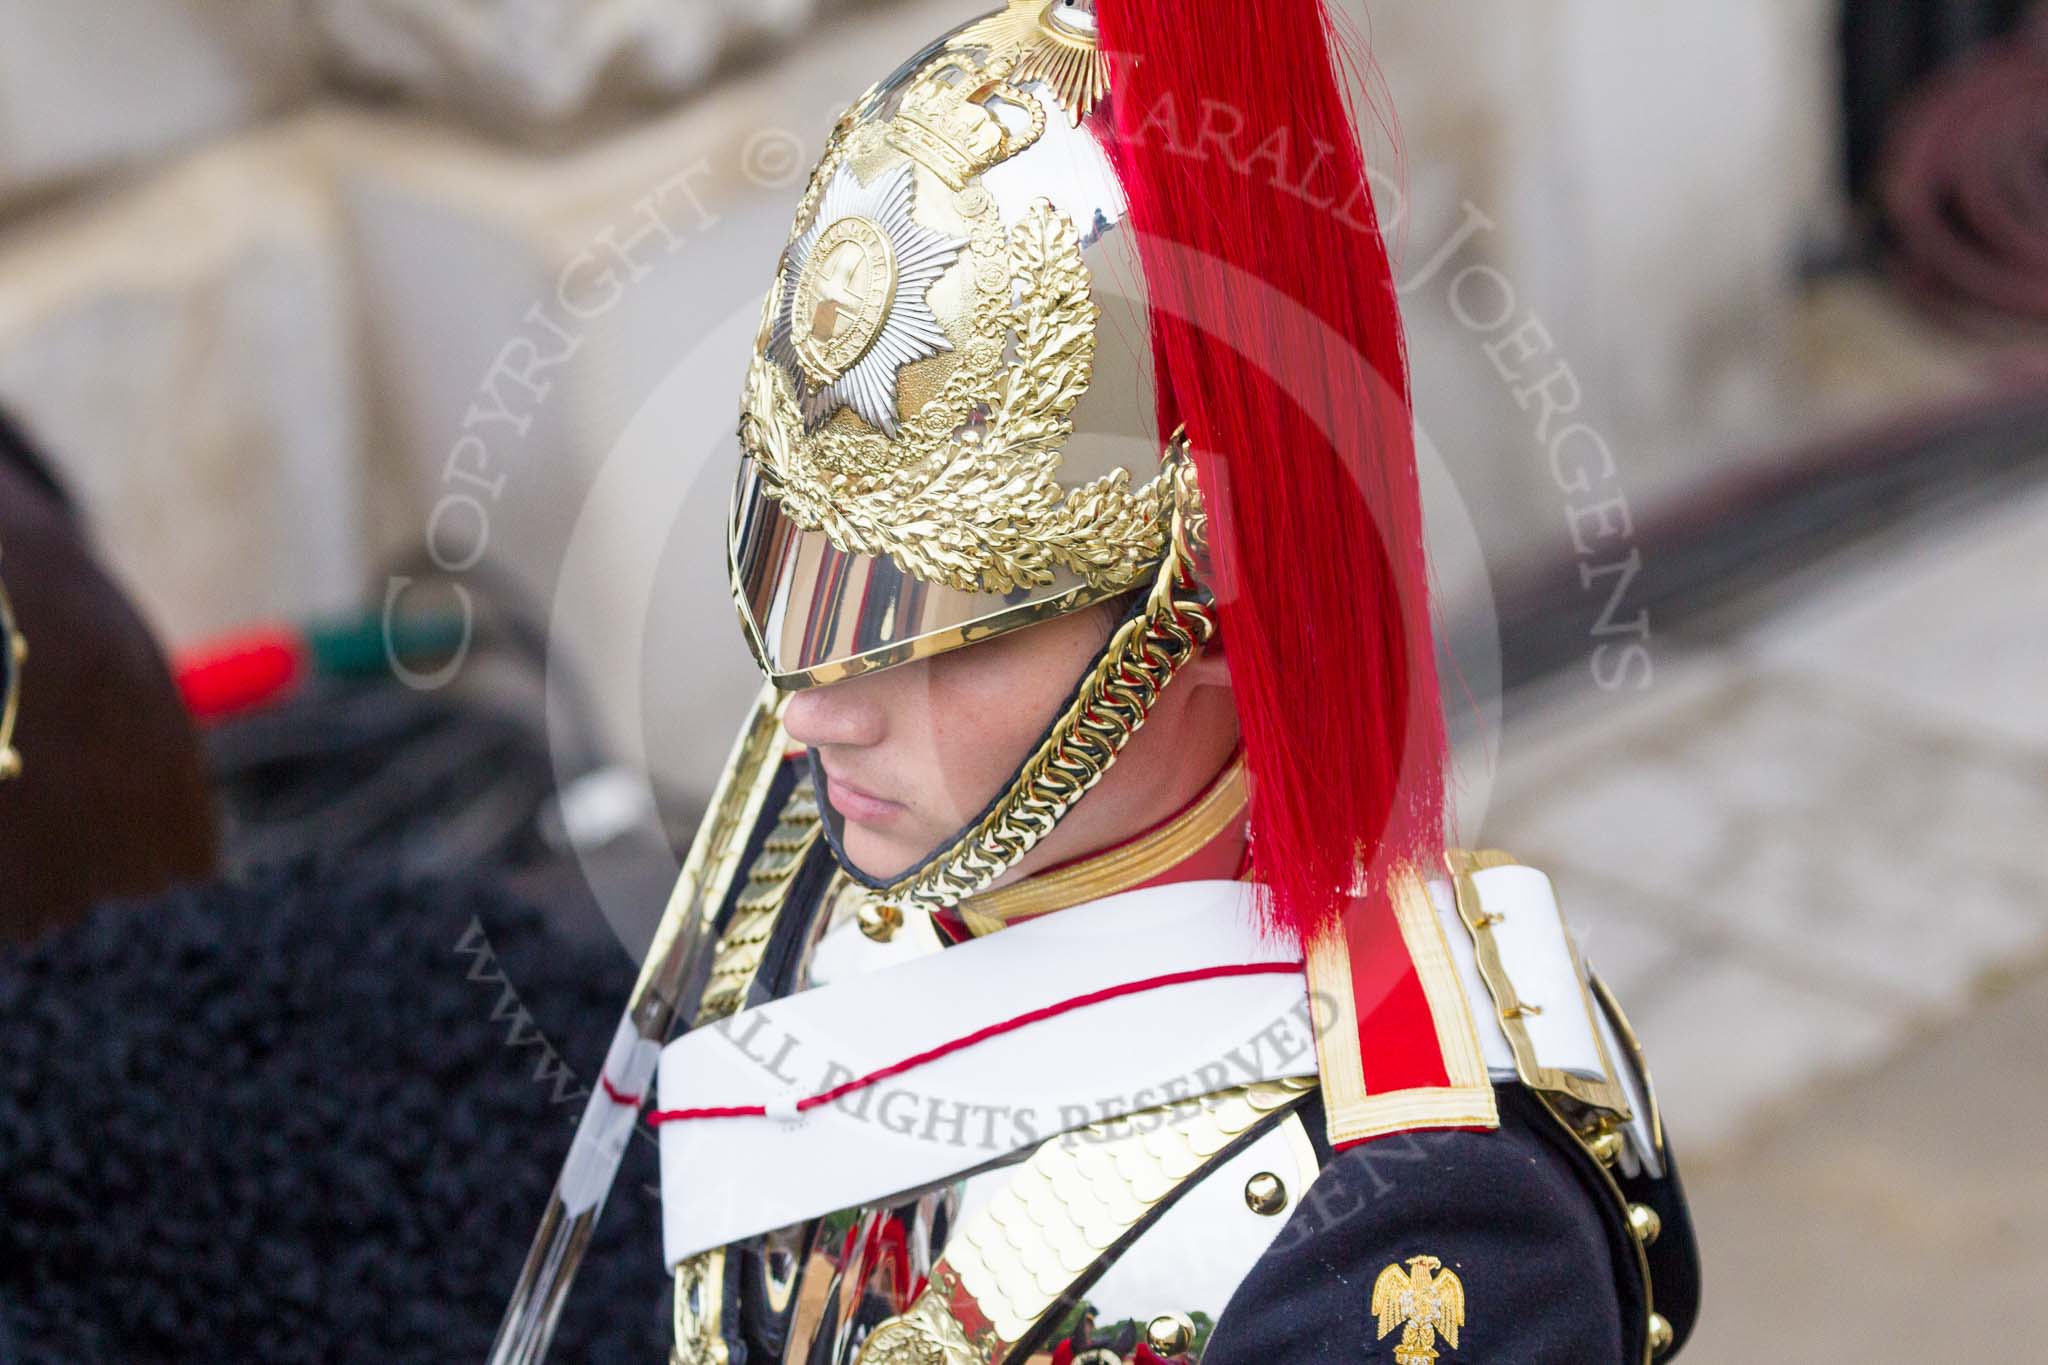 Trooping the Colour 2015. Image #628, 13 June 2015 12:00 Horse Guards Parade, London, UK